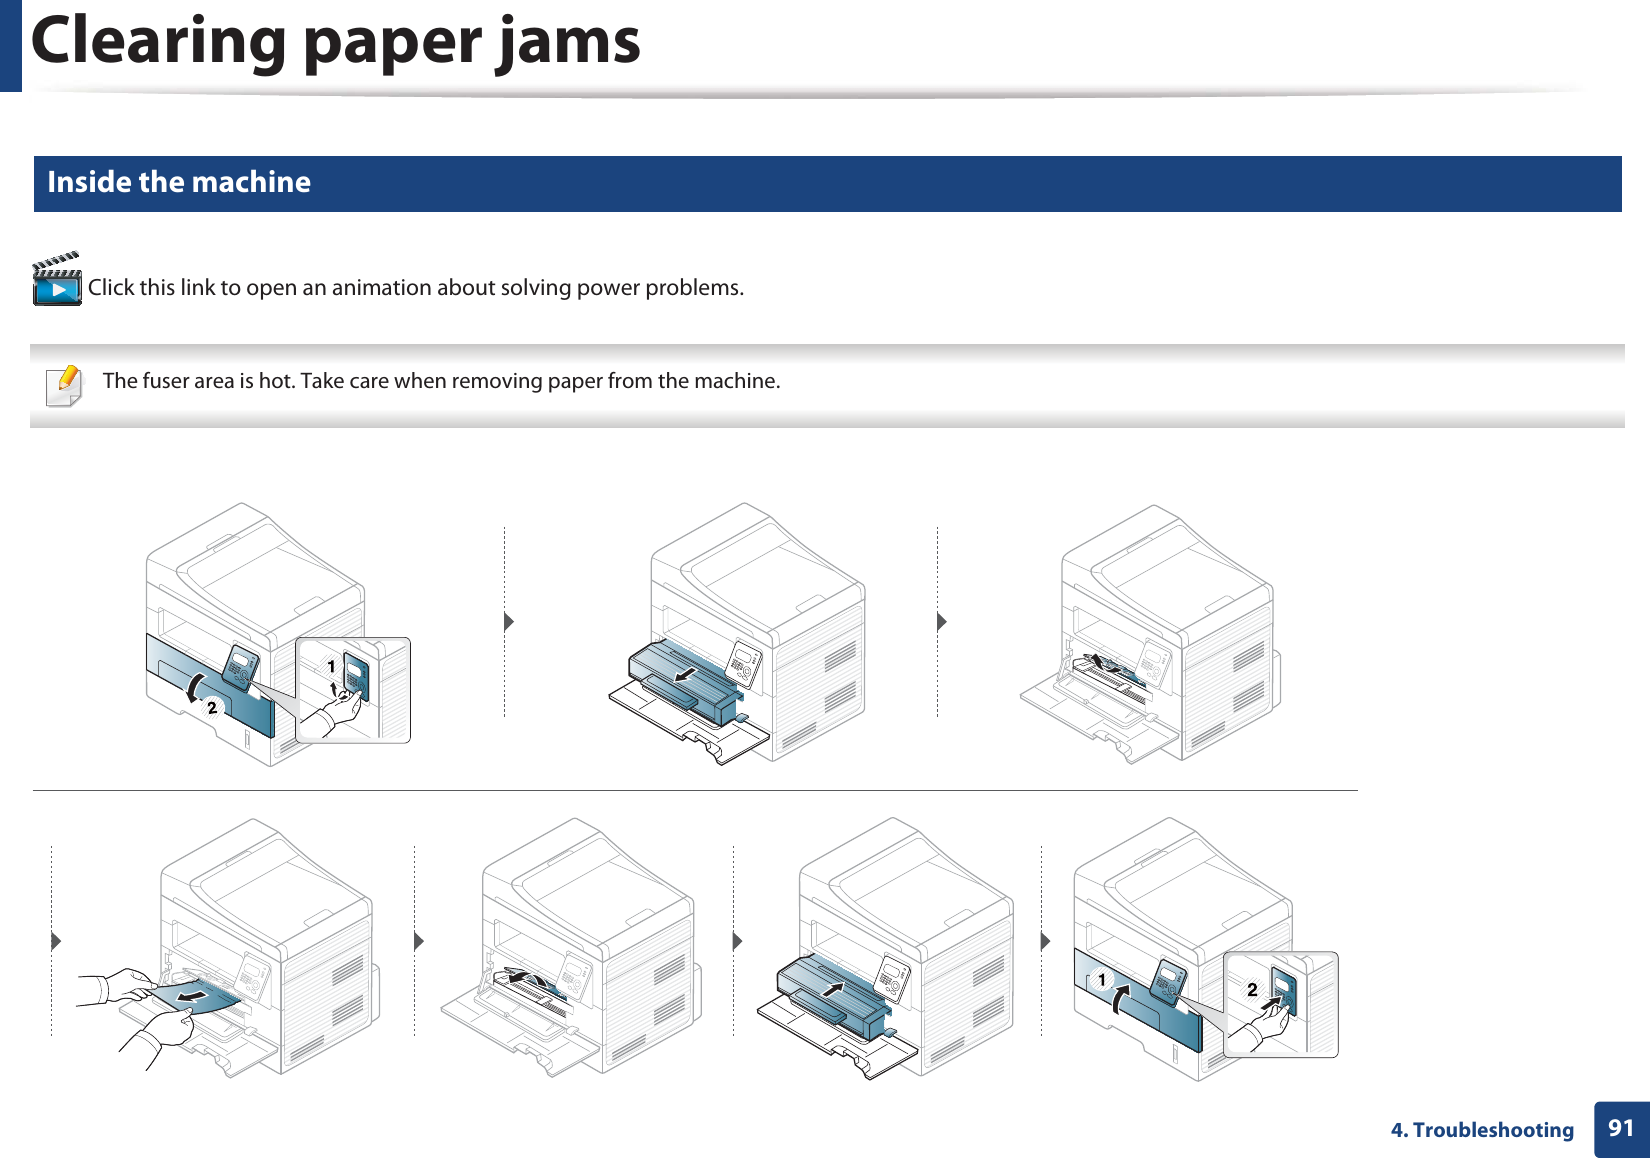 Clearing paper jams914. Troubleshooting6 Inside the machine Click this link to open an animation about solving power problems. The fuser area is hot. Take care when removing paper from the machine. 